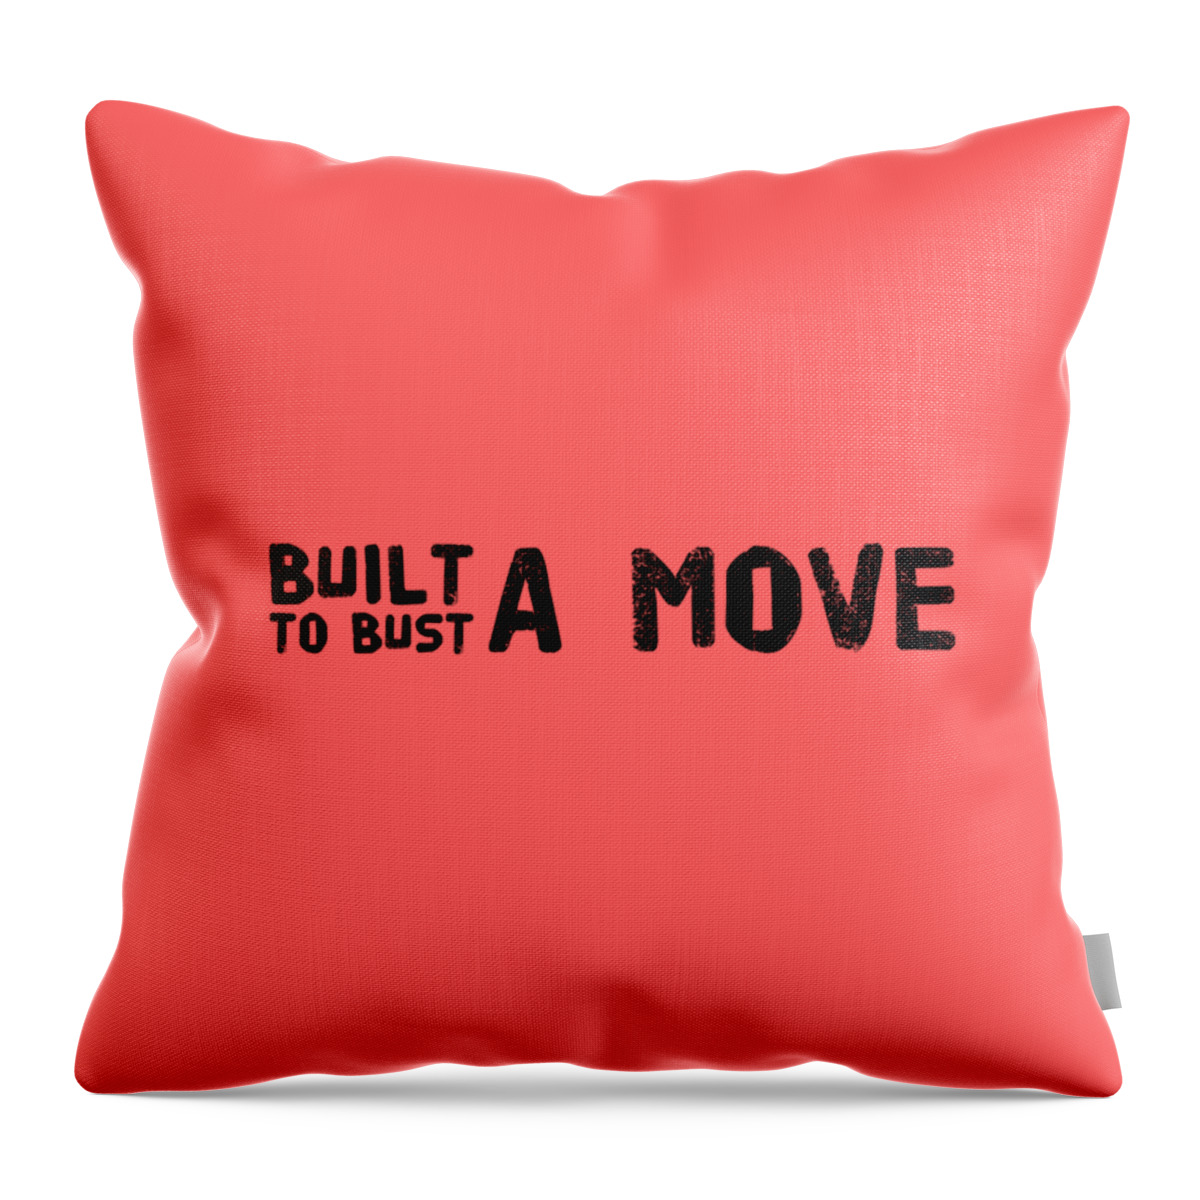 Bust A Move Throw Pillow featuring the digital art Built to Bust a Move Dance Design by Christie Olstad